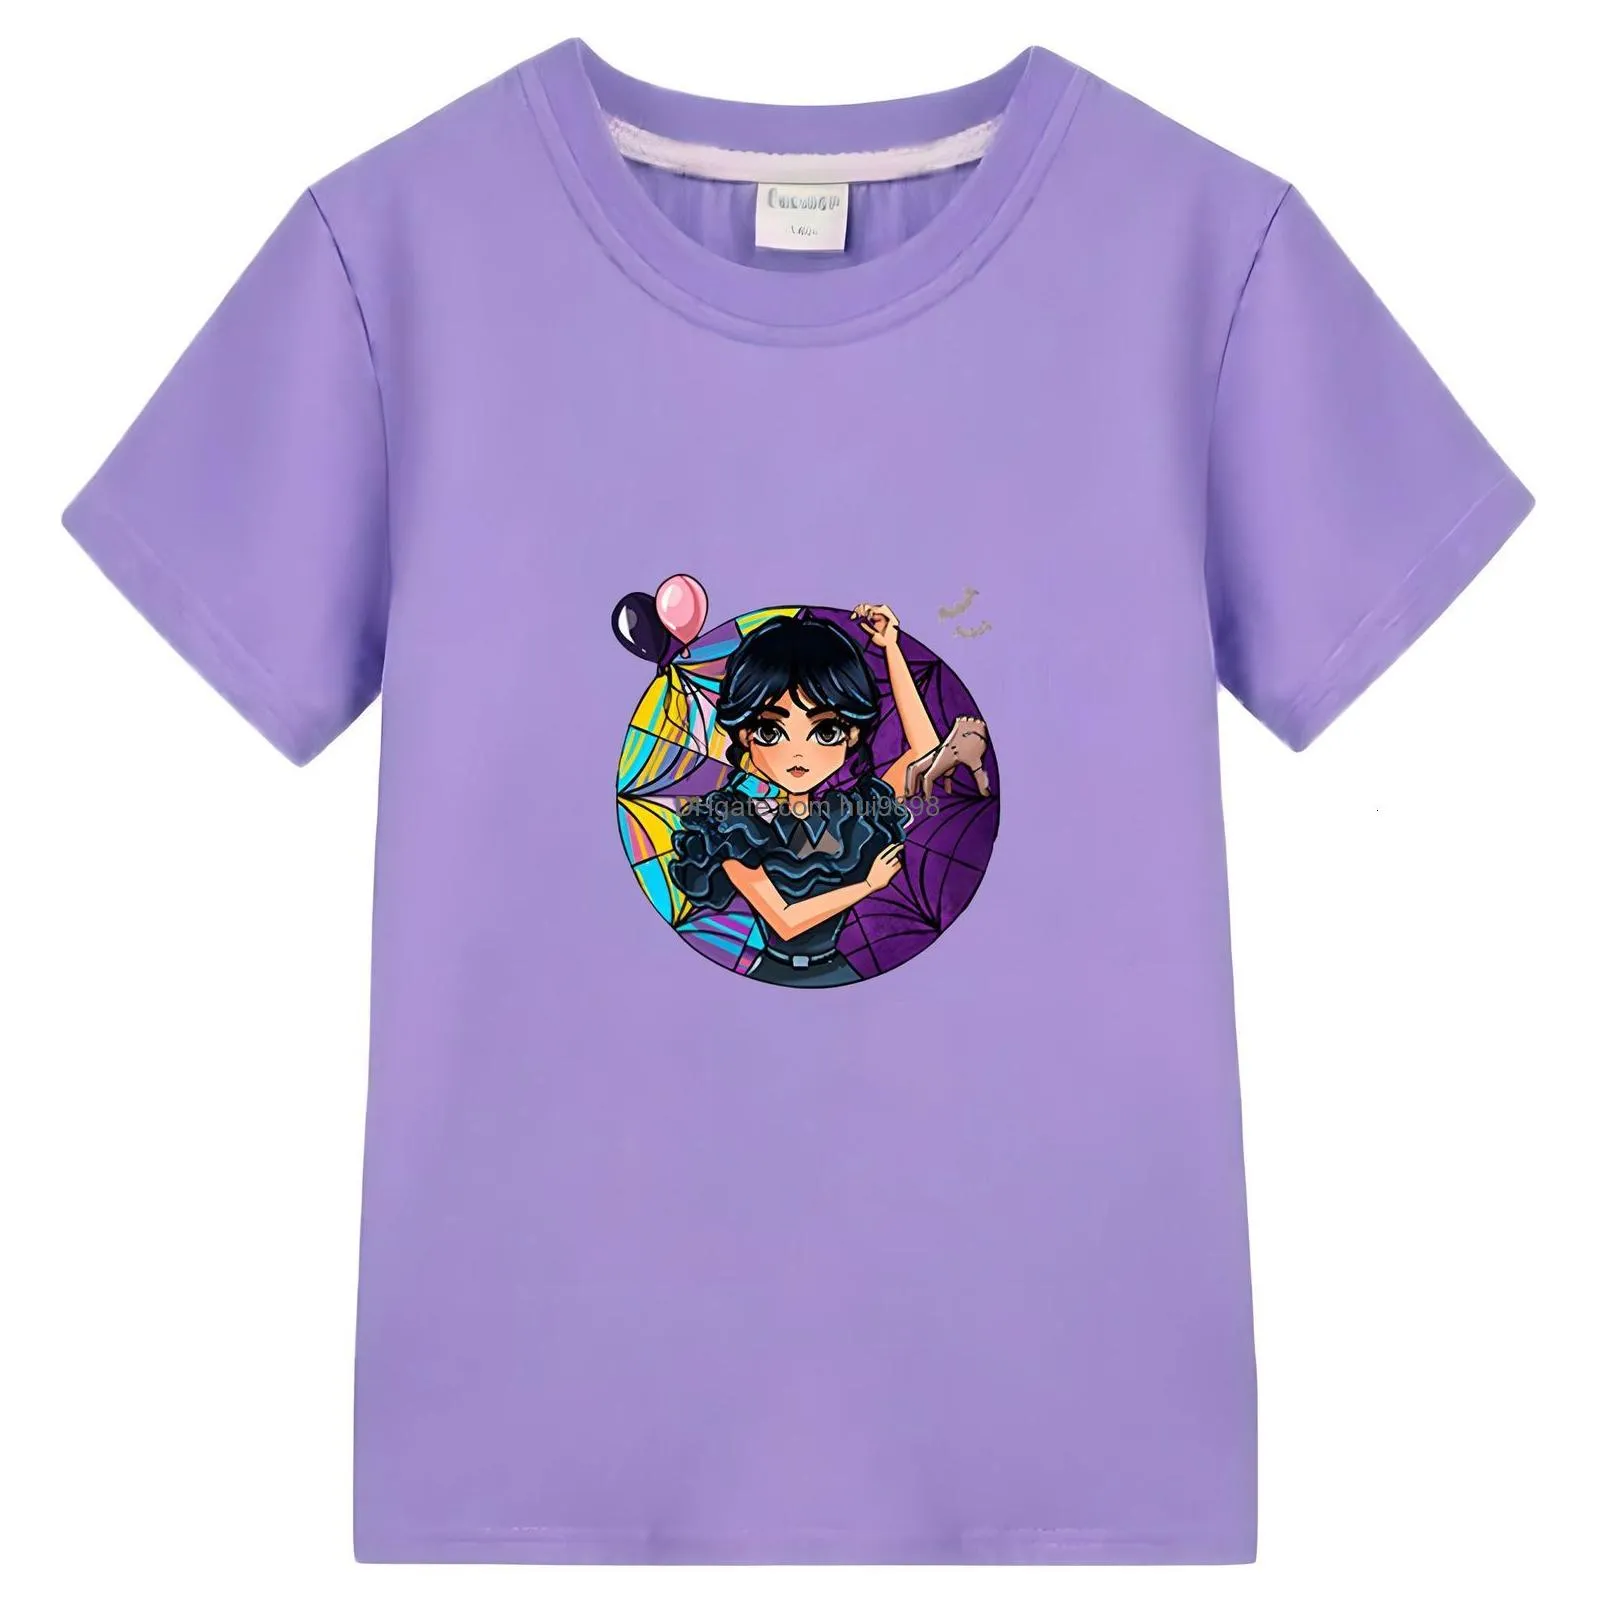 clothing sets wednesday kids anime cartoon tshirt 100cotton summer short sleeve y2k boys and girls clothes kids 230630